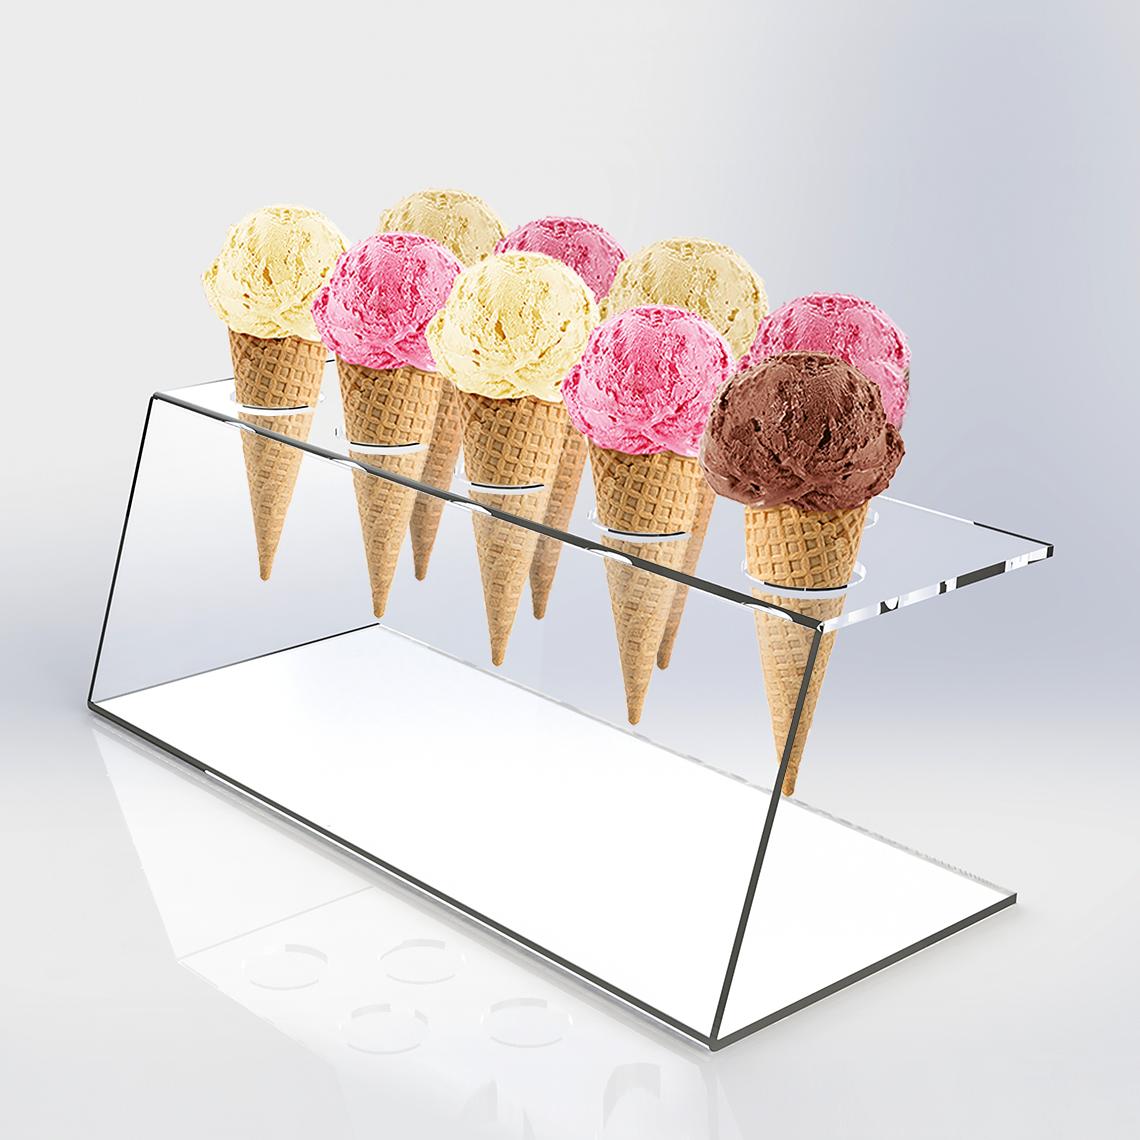 Black Iron Ice Cream Cone Holder Stand with Base 2 Holes to Display Snow  Cones Sushi Hand Rolls Popcorn Candy French Fries Sweets Savory